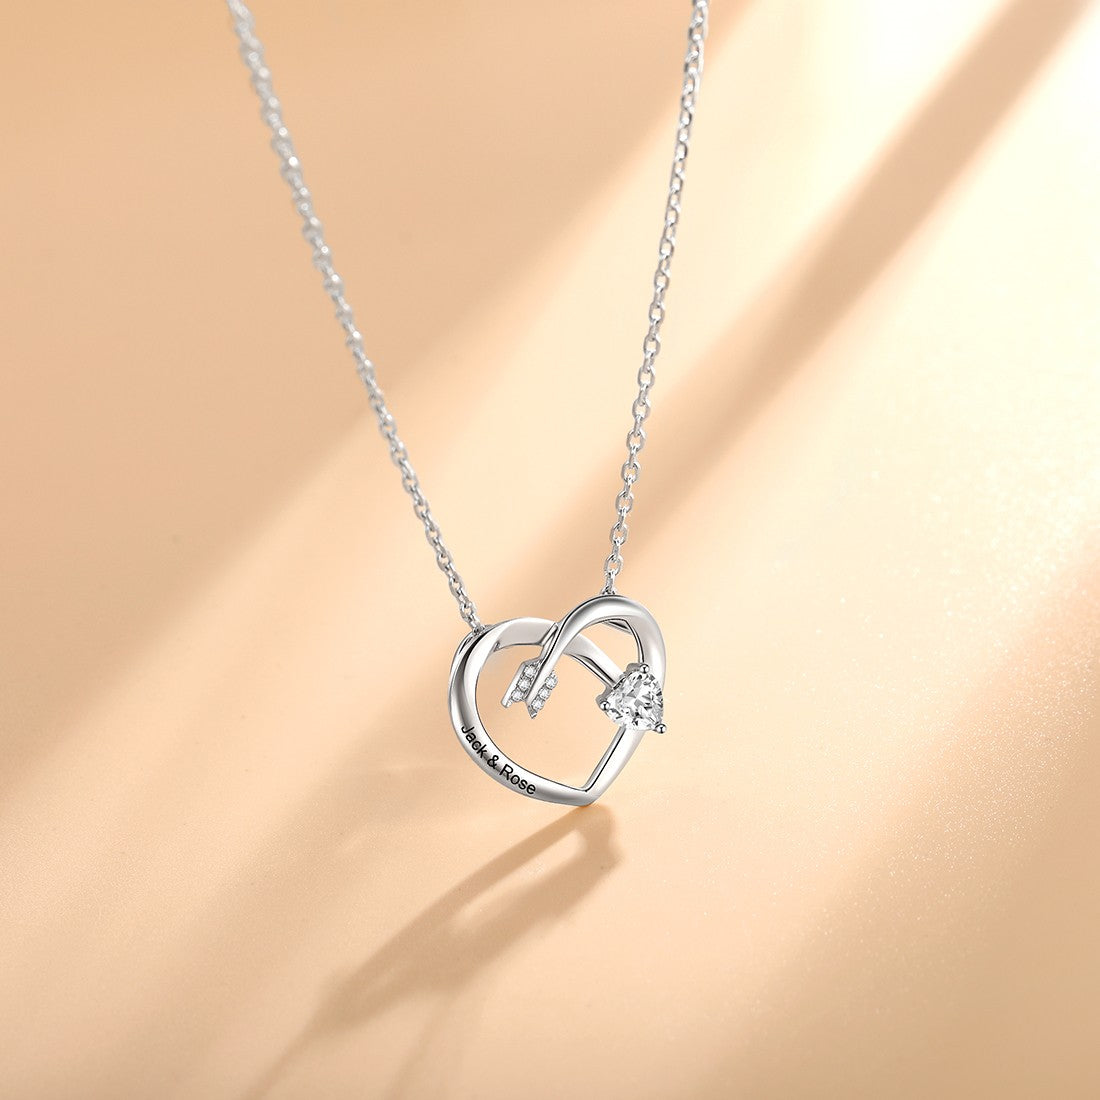 Custom4U Personalized Engraved Heart Necklace in 925 Sterling Silver